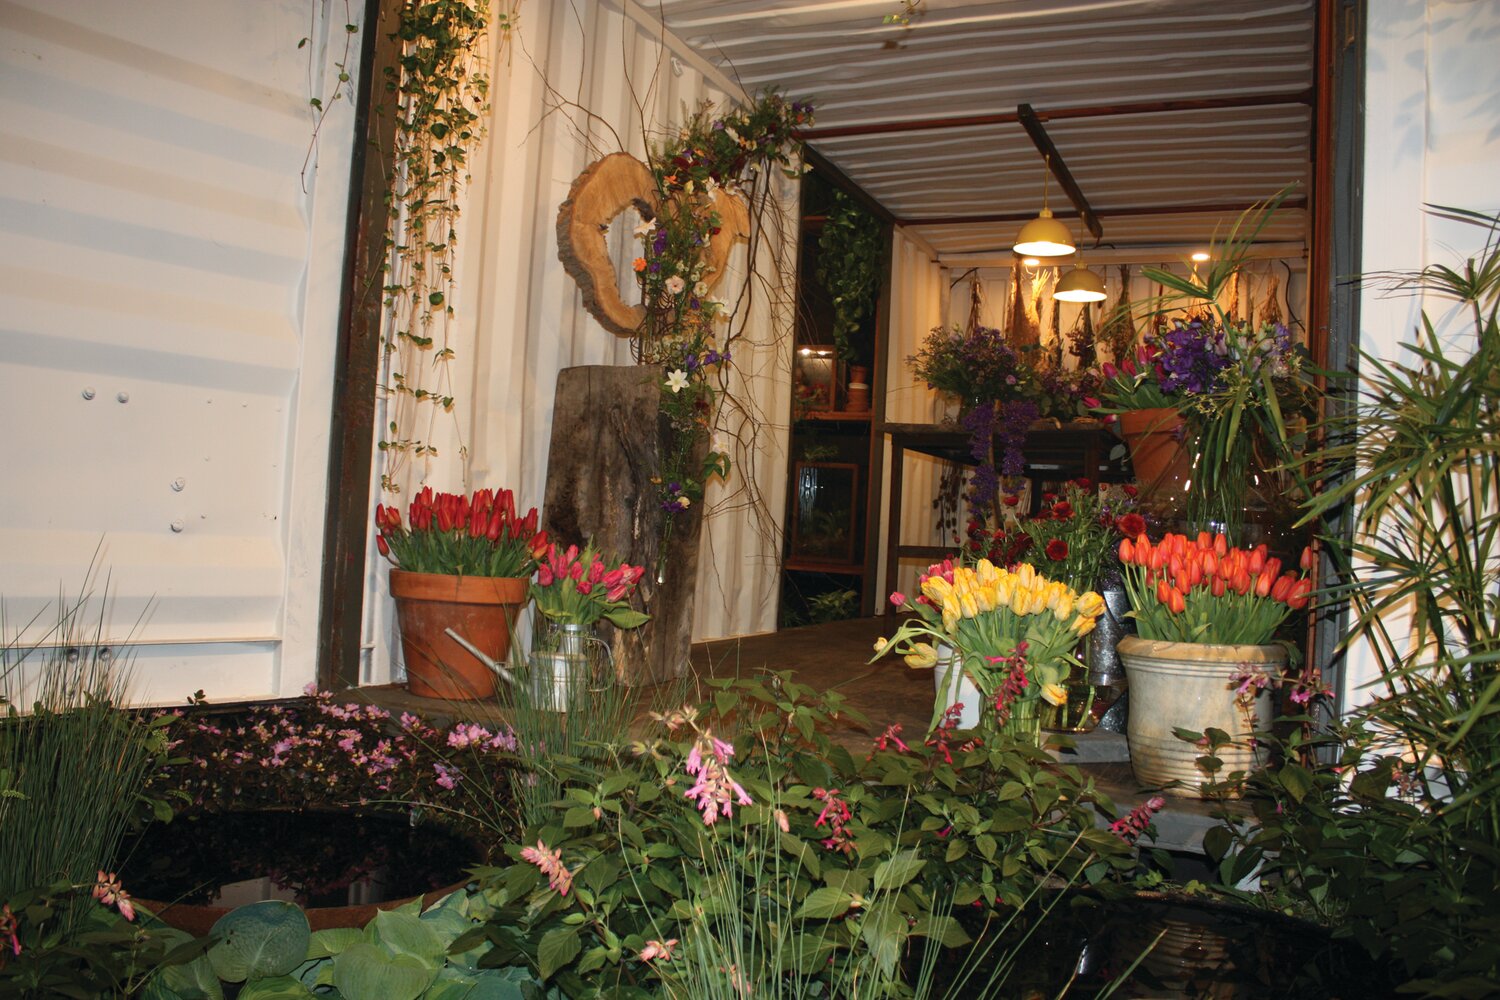 “Two Worlds” a florist’s studio and urban retreat, is by Mark Cook Landscaping and Contracting of Doylestown.